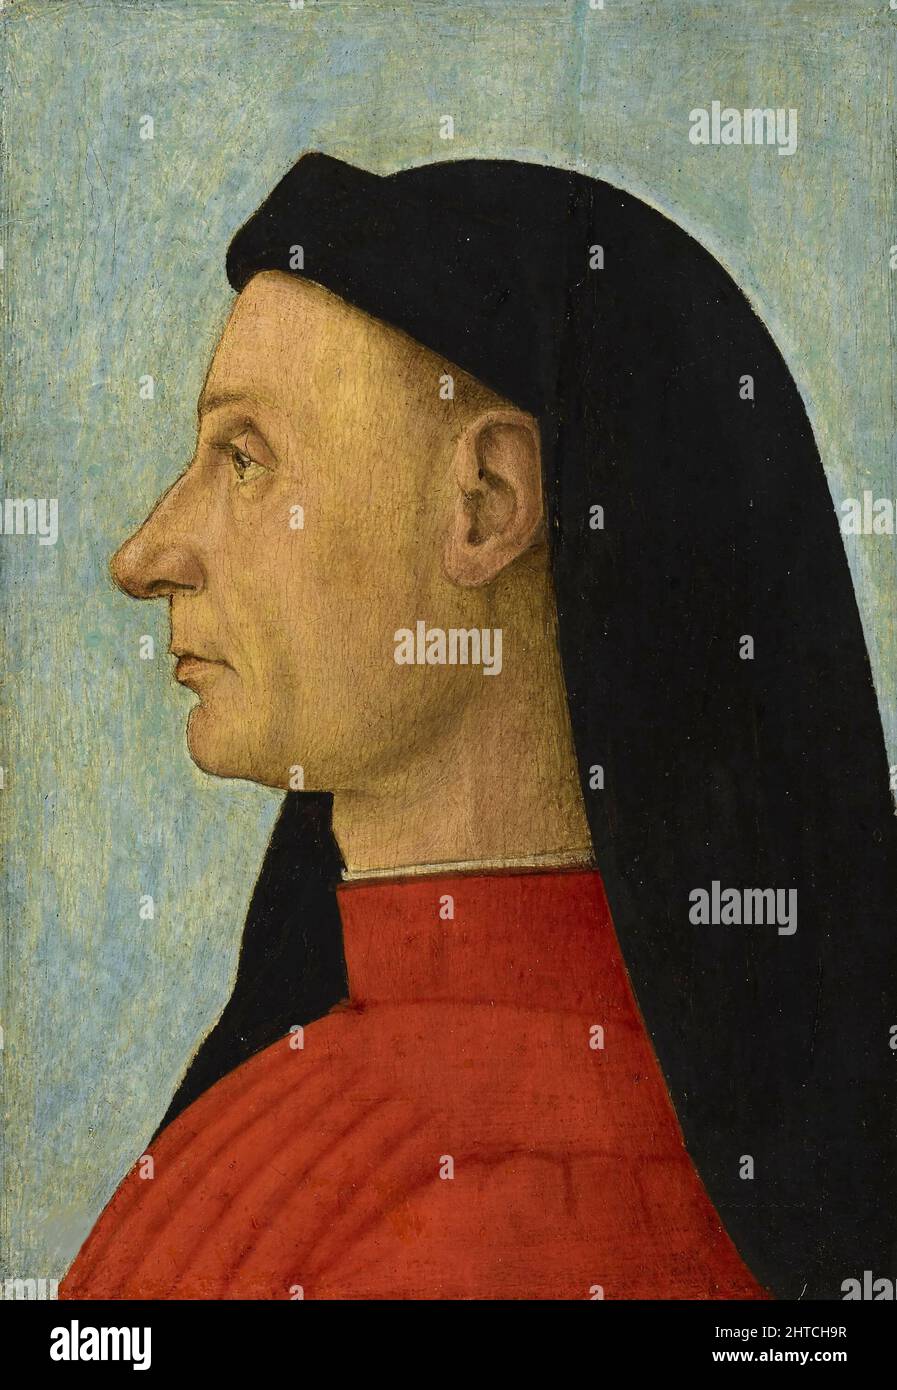 Portrait of a Man, c. 1495. Found in the Collection of the Accademia Carrara, Bergamo. Stock Photo